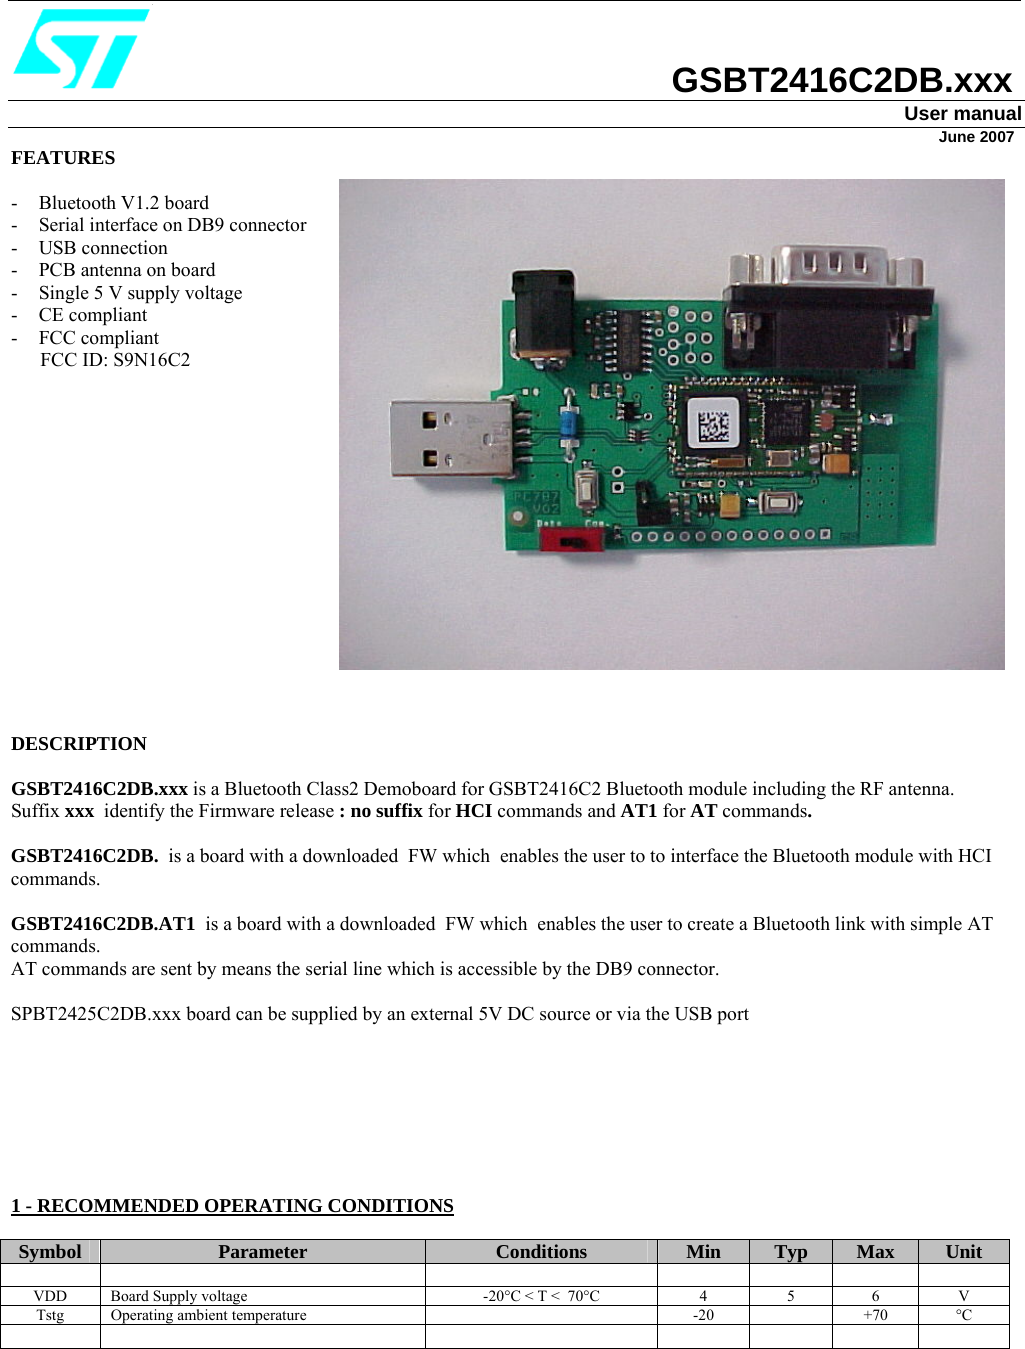                                   GSBT2416C2DB.xxx User manual                                                                                                                                                                                                                       June 2007 FEATURES  - Bluetooth V1.2 board - Serial interface on DB9 connector - USB connection - PCB antenna on board - Single 5 V supply voltage - CE compliant - FCC compliant        FCC ID: S9N16C2                 DESCRIPTION  GSBT2416C2DB.xxx is a Bluetooth Class2 Demoboard for GSBT2416C2 Bluetooth module including the RF antenna. Suffix xxx  identify the Firmware release : no suffix for HCI commands and AT1 for AT commands. GSBT2416C2DB.  is a board with a downloaded  FW which  enables the user to to interface the Bluetooth module with HCI commands.  GSBT2416C2DB.AT1  is a board with a downloaded  FW which  enables the user to create a Bluetooth link with simple AT commands. AT commands are sent by means the serial line which is accessible by the DB9 connector.  SPBT2425C2DB.xxx board can be supplied by an external 5V DC source or via the USB port        1 - RECOMMENDED OPERATING CONDITIONS  Symbol  Parameter  Conditions  Min  Typ  Max  Unit             VDD  Board Supply voltage   -20°C &lt; T &lt;  70°C  4  5  6  V Tstg Operating ambient temperature    -20    +70  °C                   